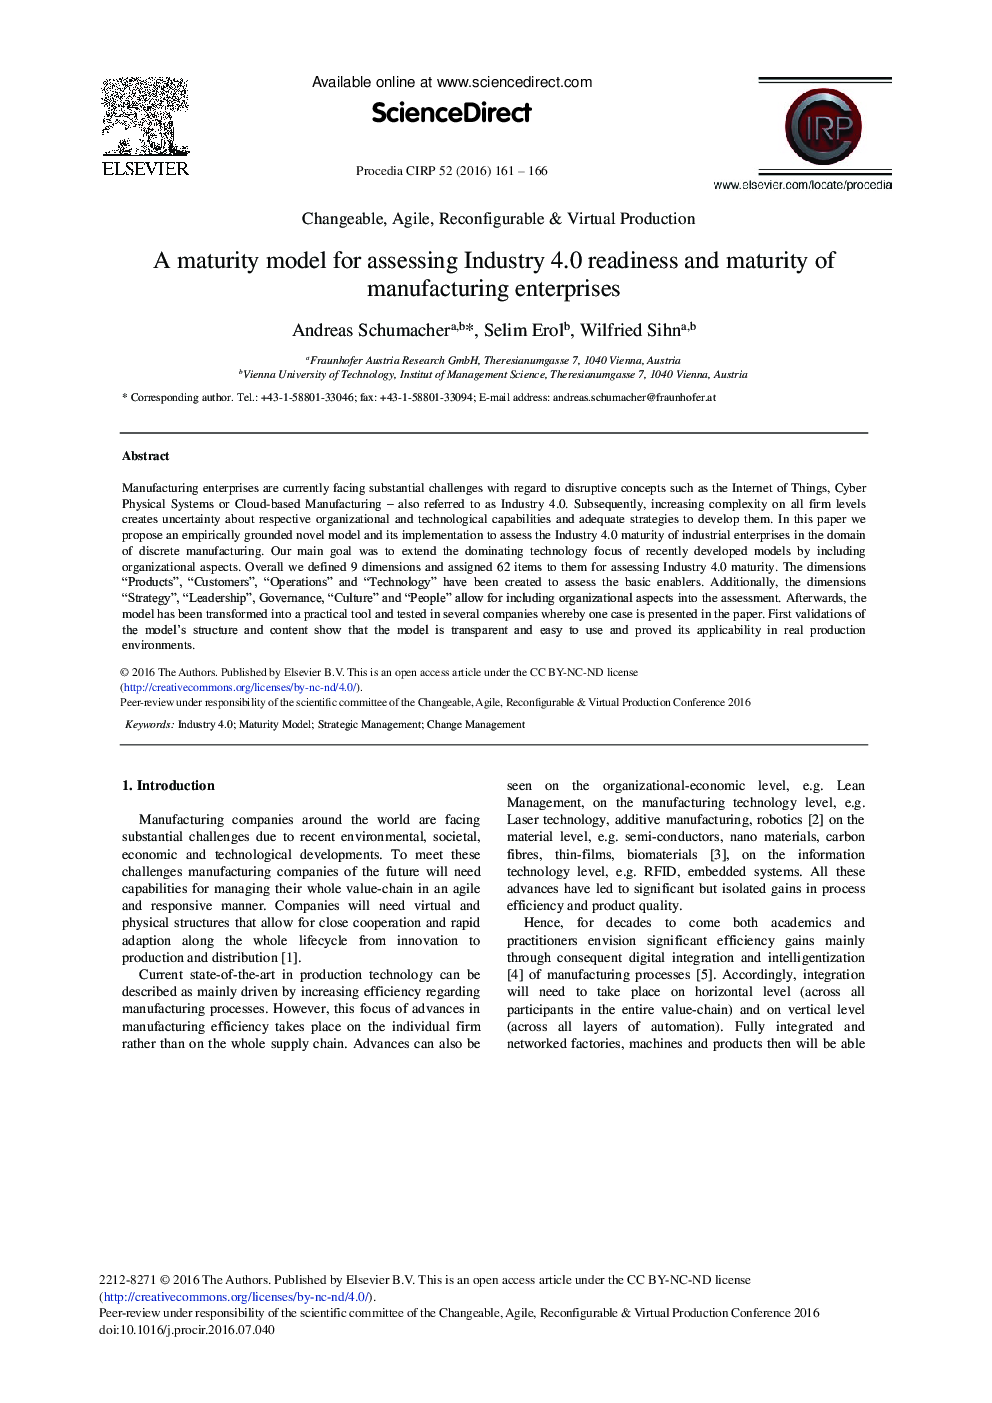 A Maturity Model for Assessing Industry 4.0 Readiness and Maturity of Manufacturing Enterprises 